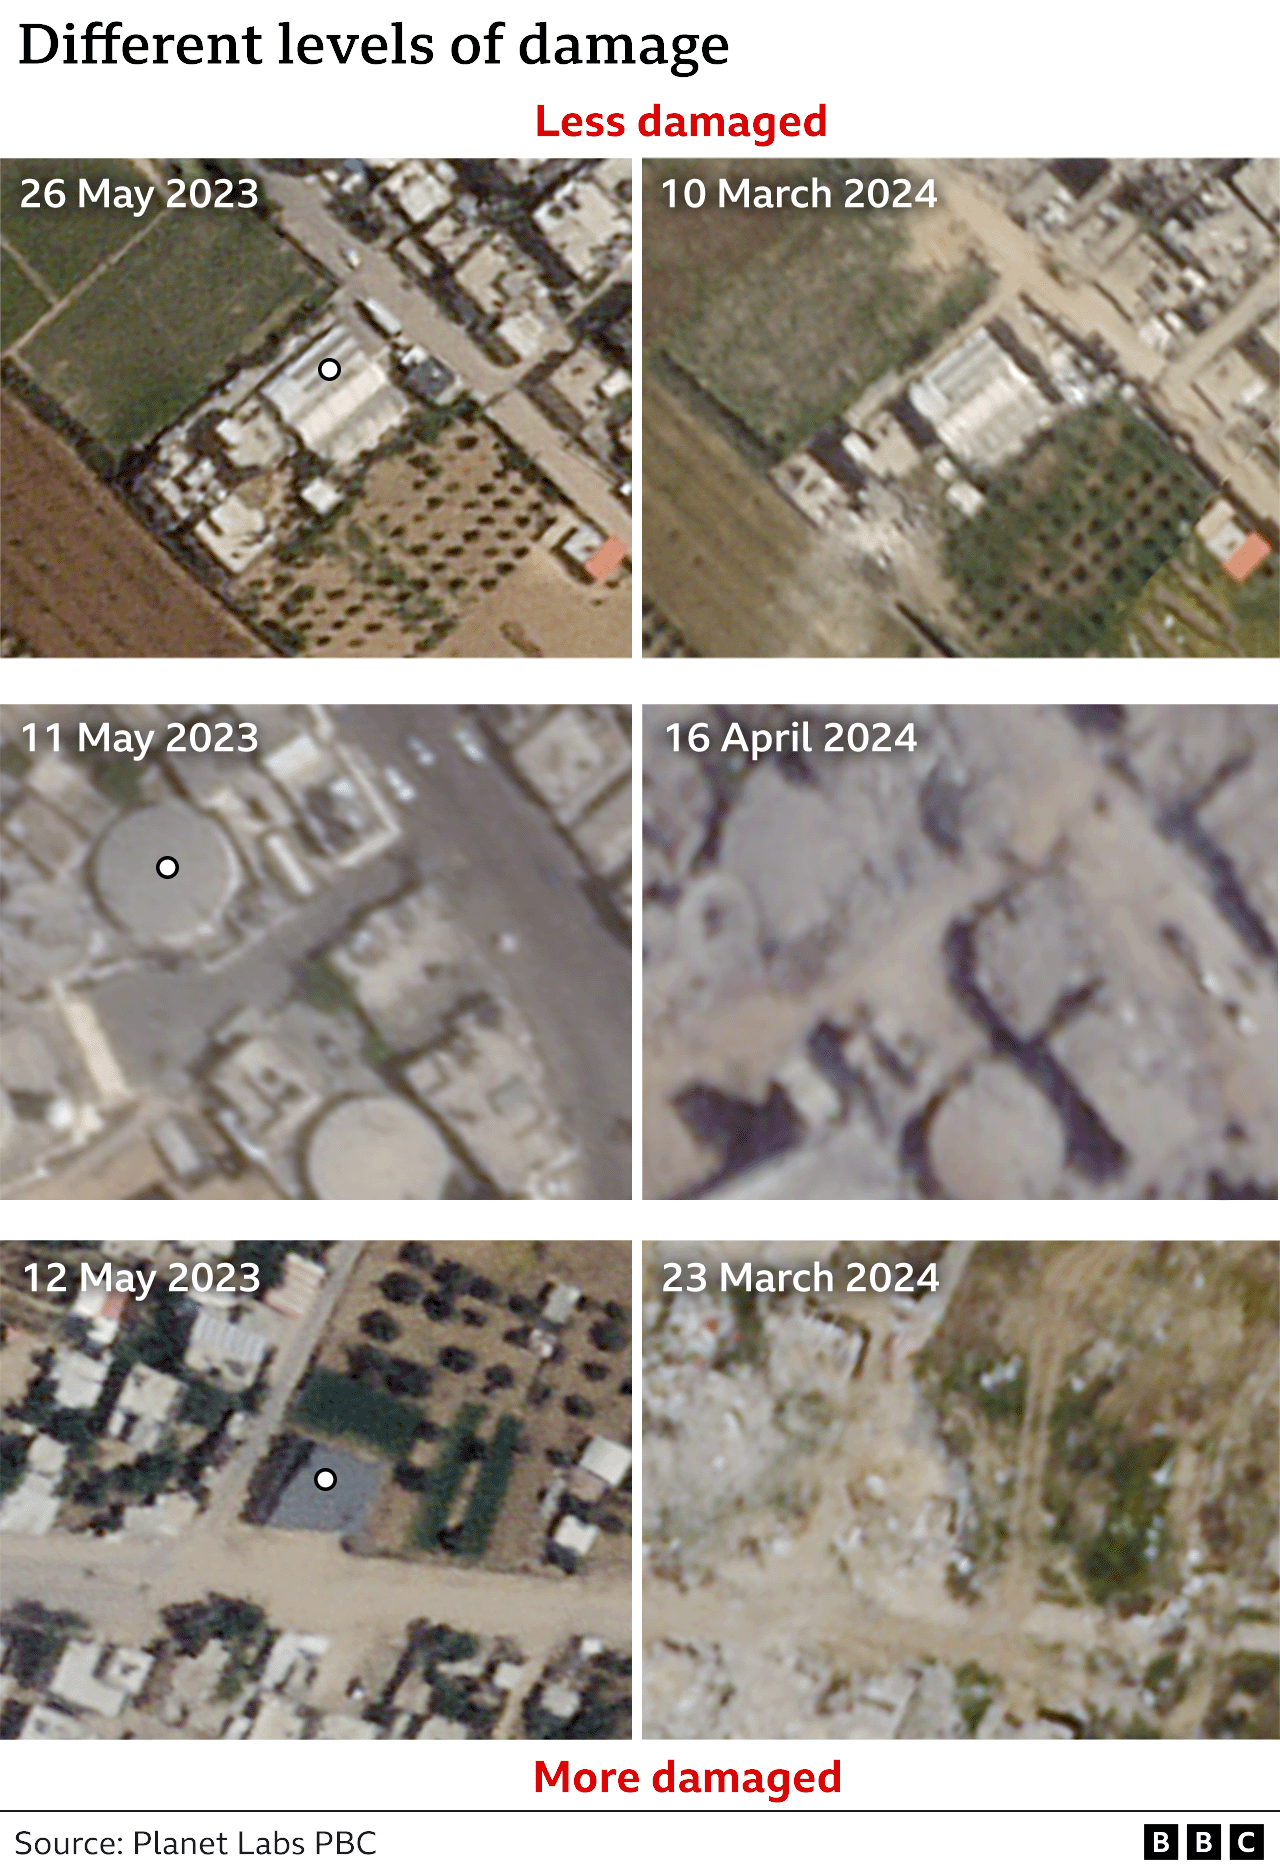 Three pairs of 'before' and 'after' satellite images showing some sites that are 'less damaged' and others that are 'more damaged'